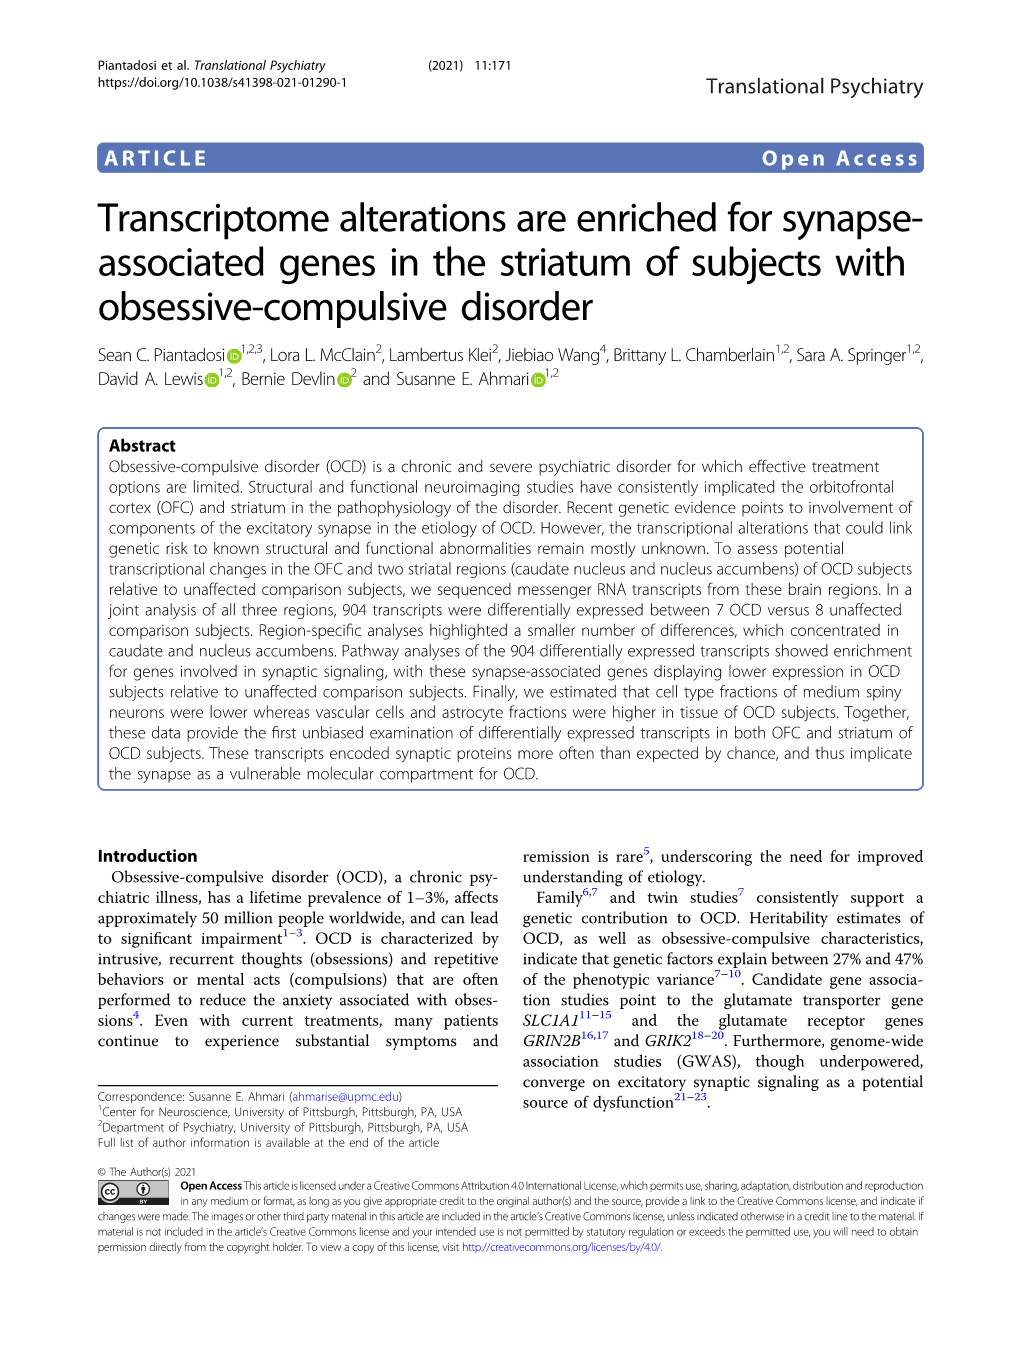 Transcriptome Alterations Are Enriched for Synapse-Associated